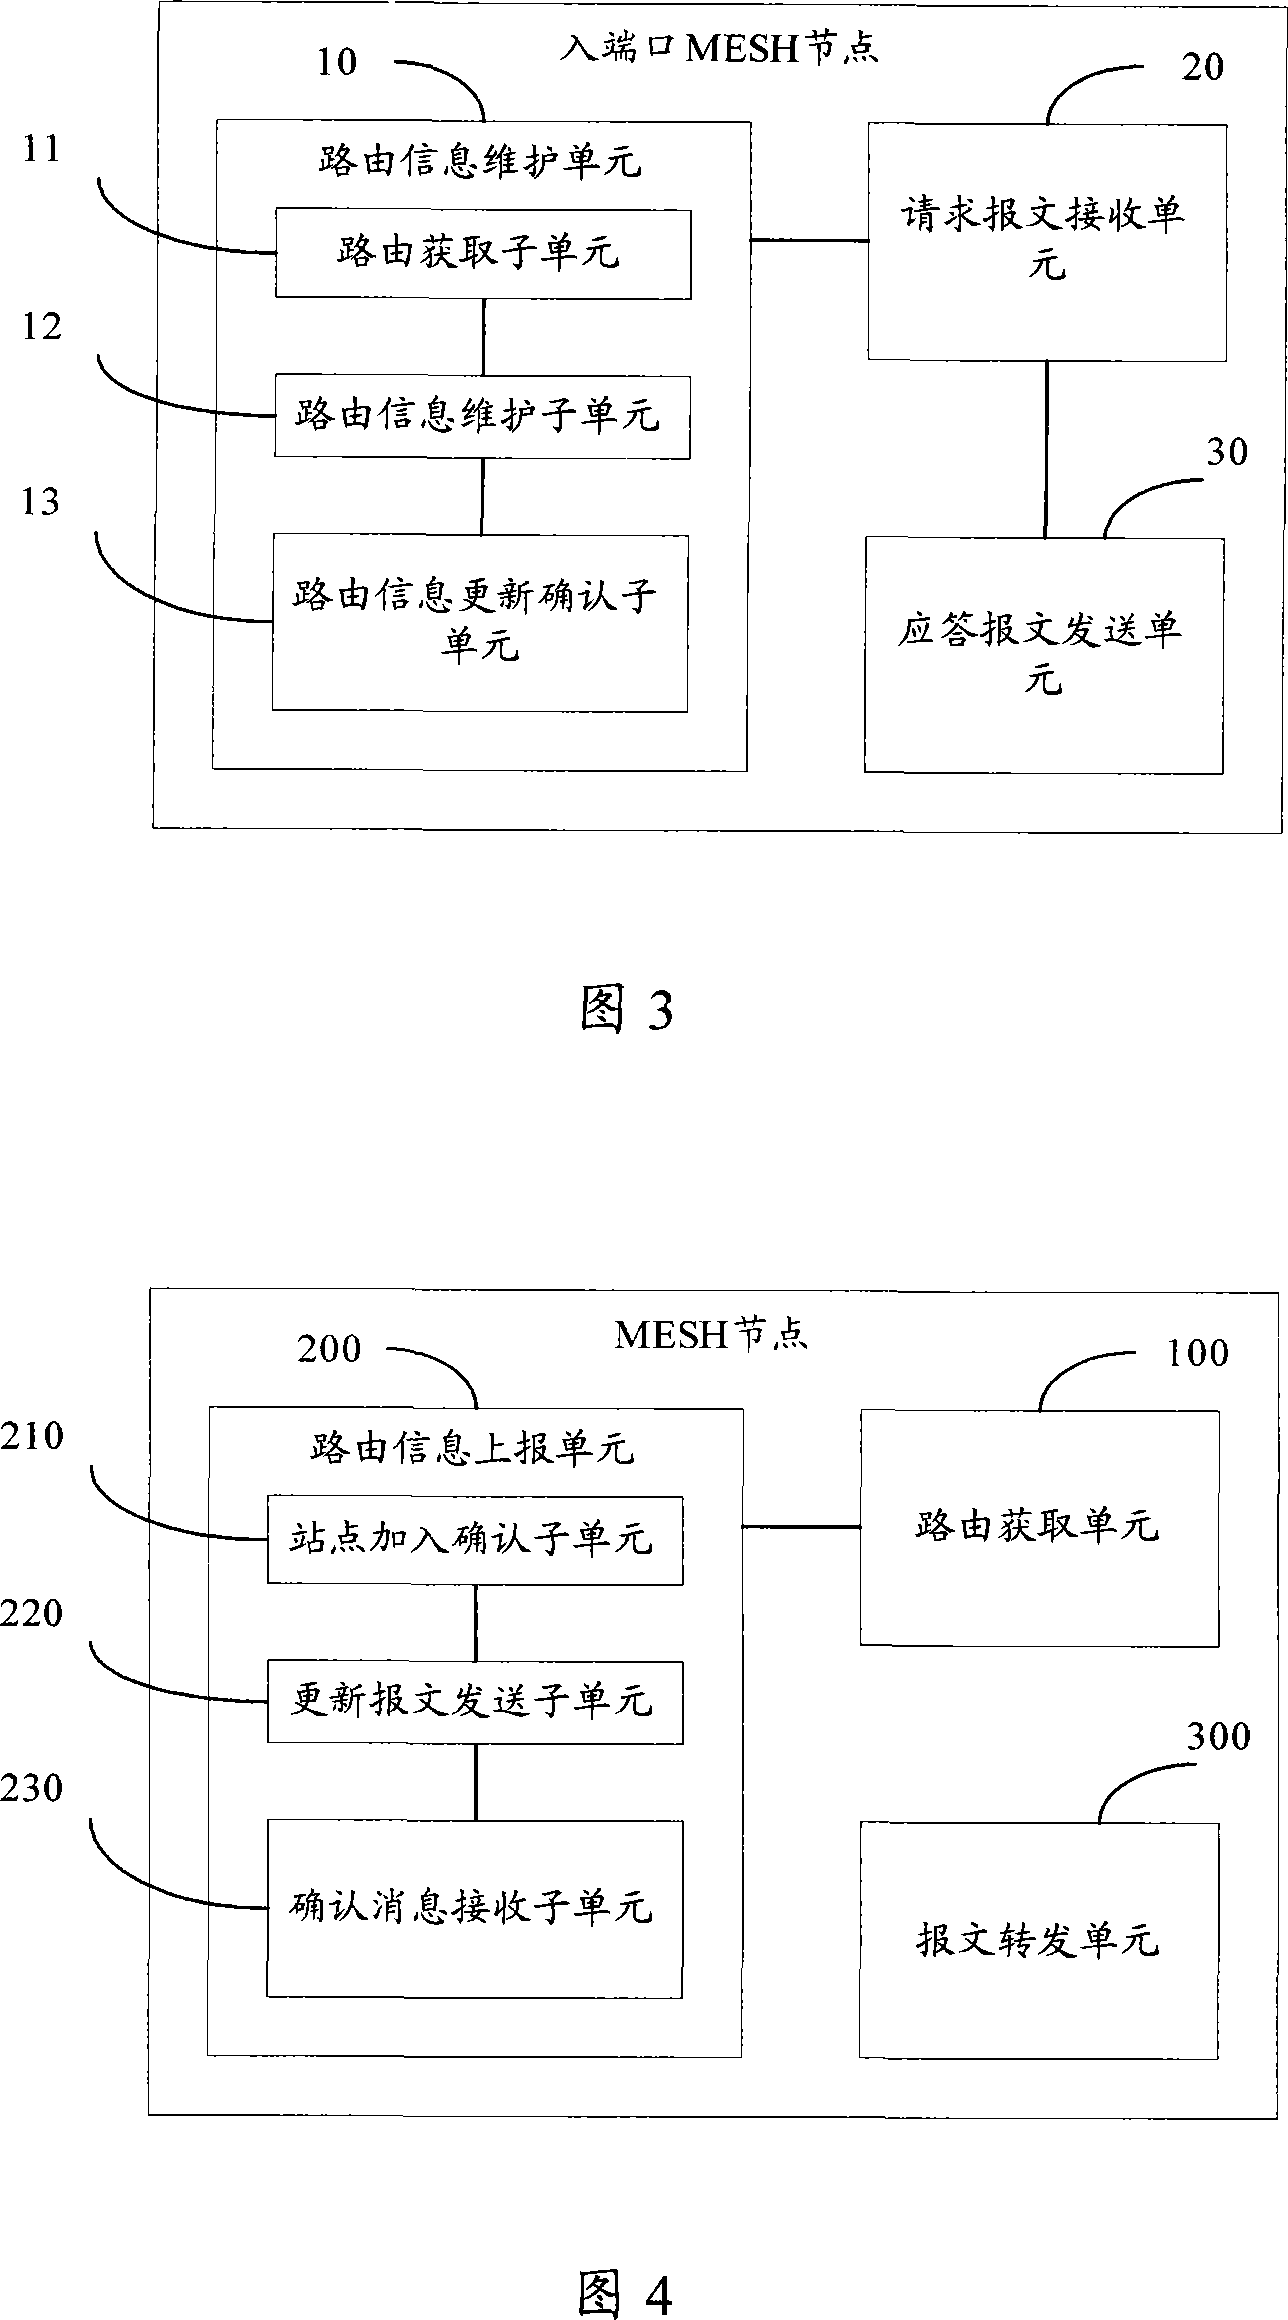 Method and apparatus for mixed routing in wireless mesh network